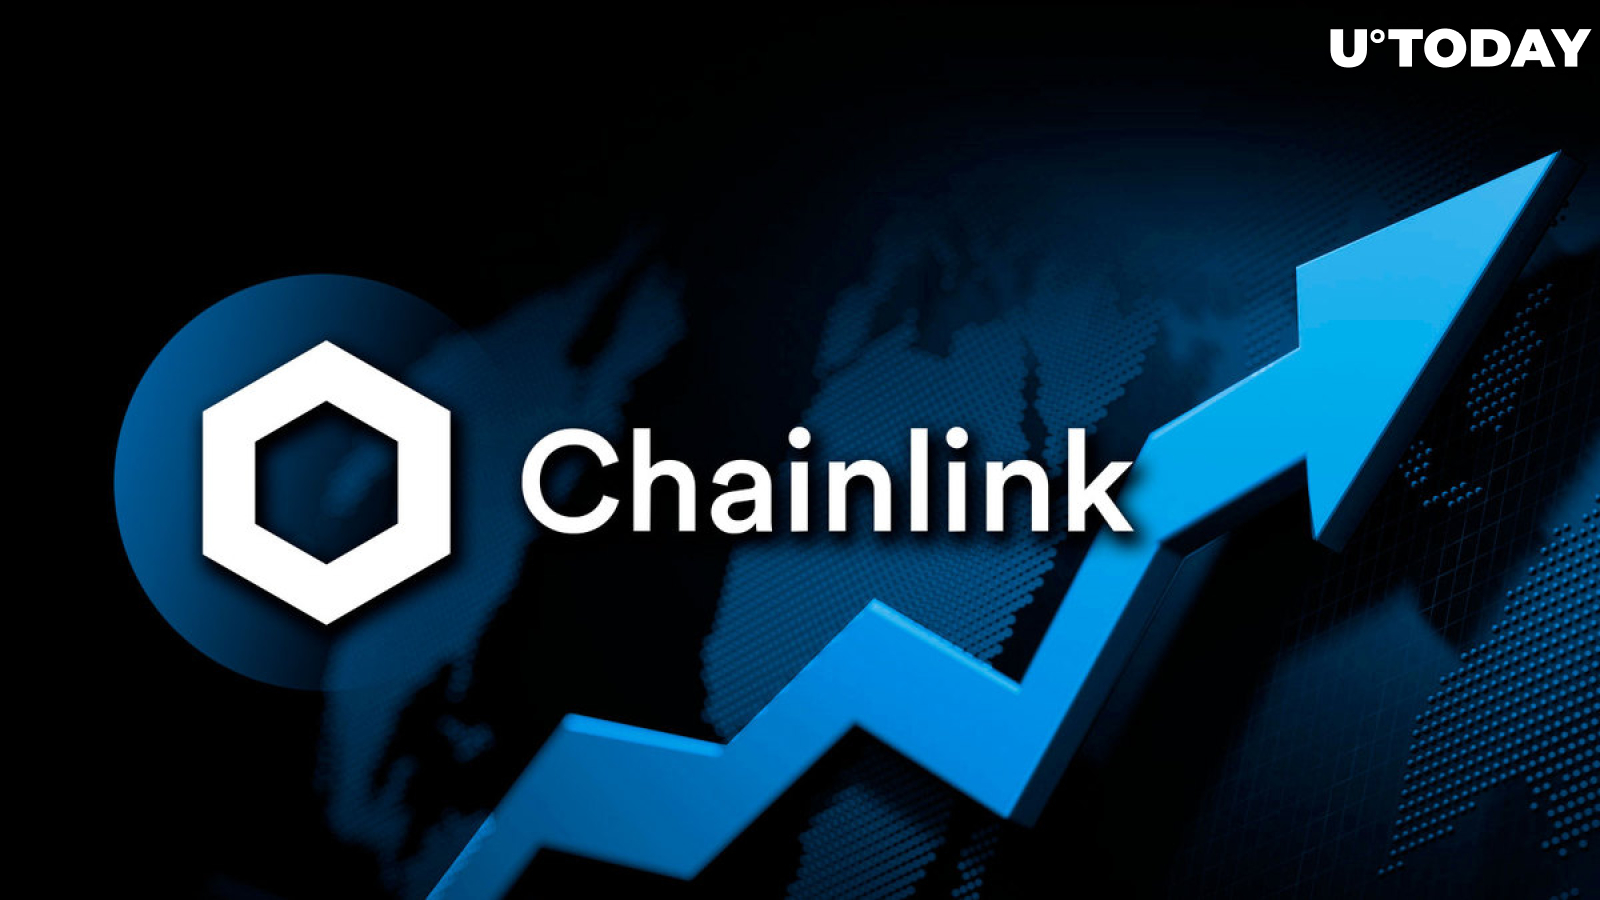 Chainlink's 51% Surge Puts LINK at Top of Altcoin Market Chain